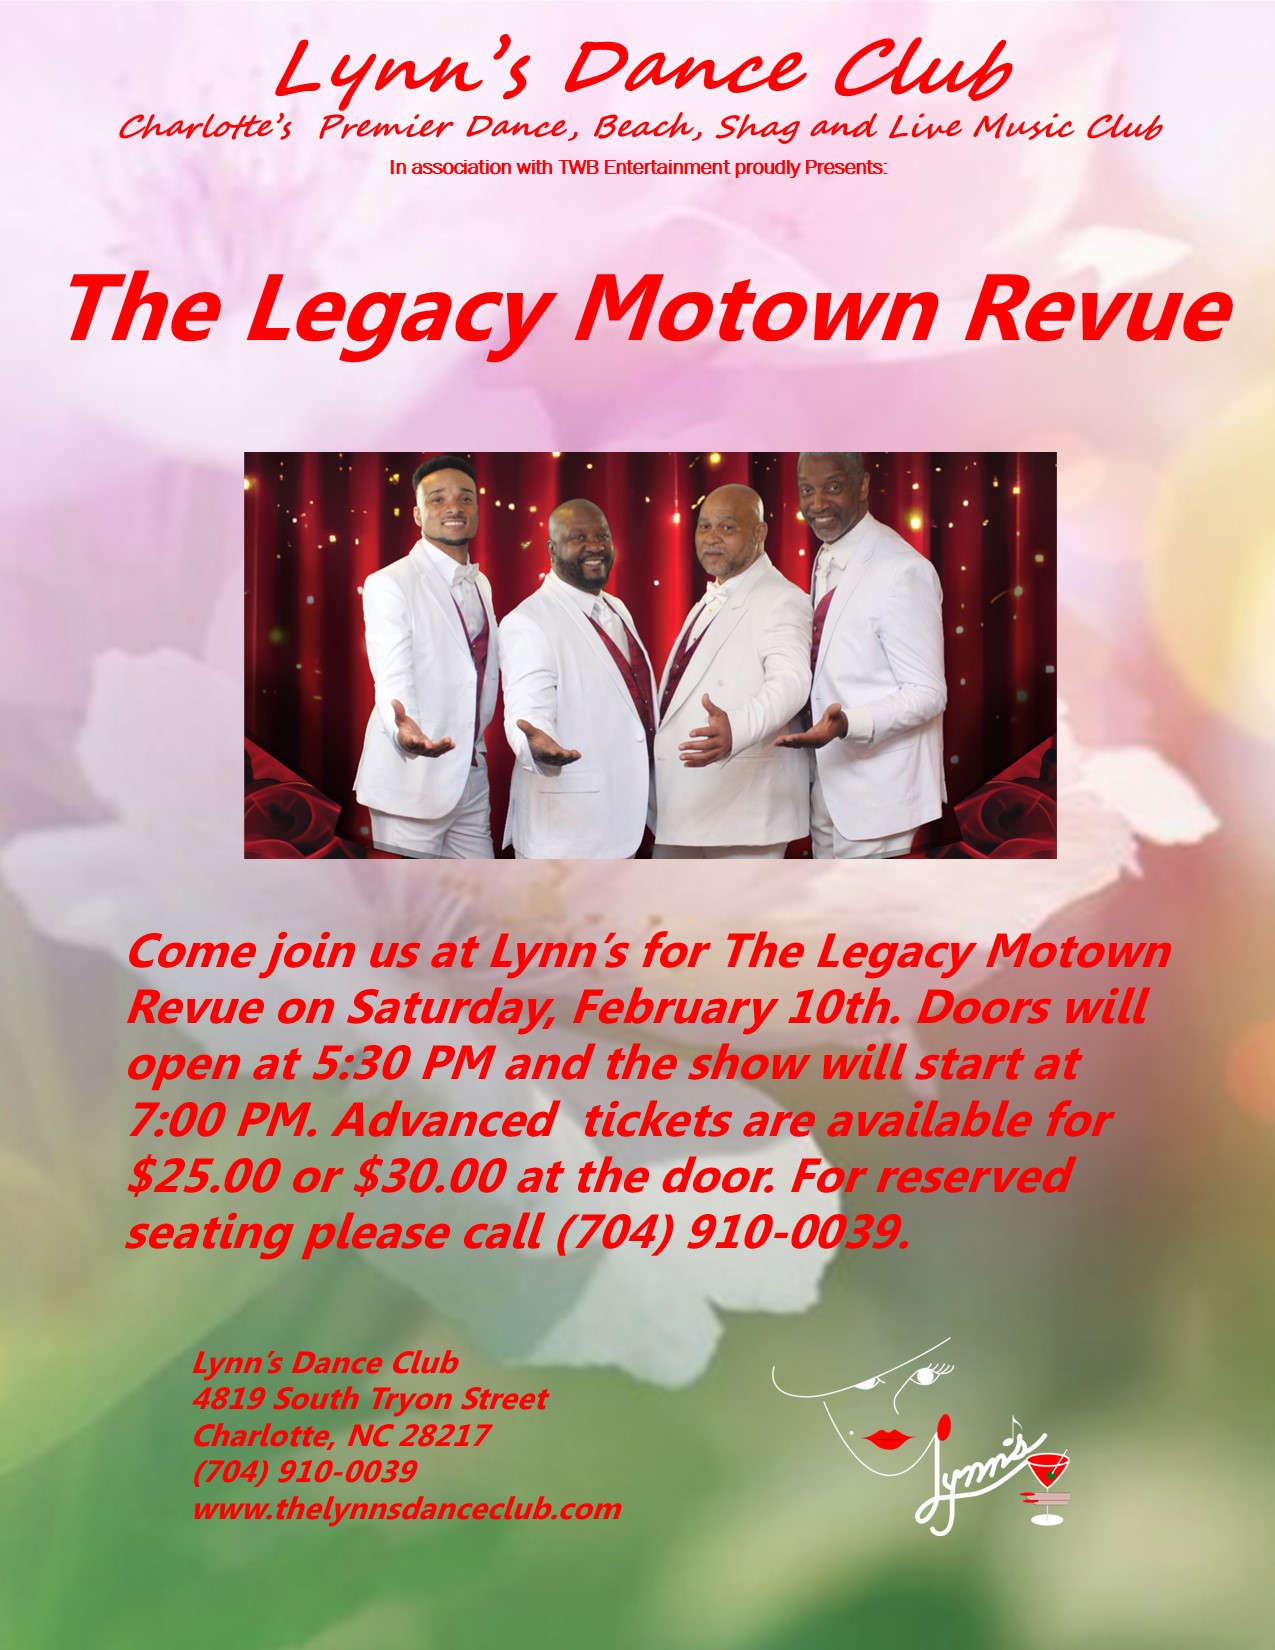 The Legacy Motown Revue